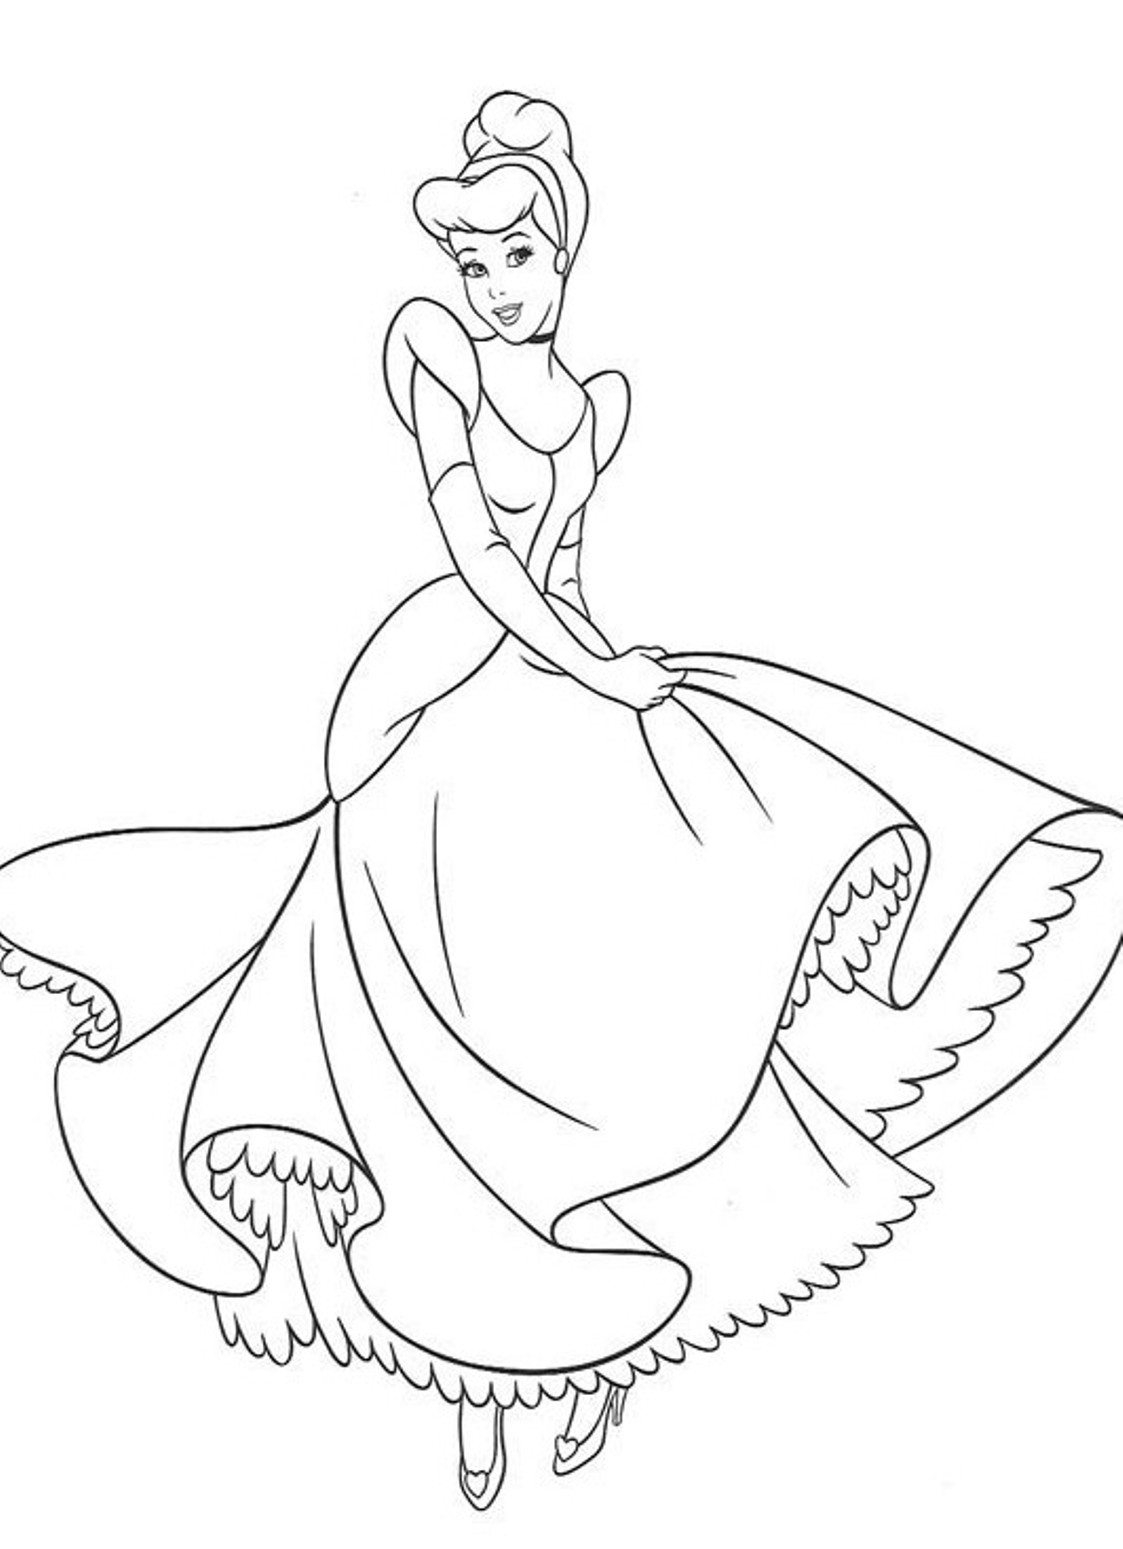 Free Cinderella Coloring Pages Charming Cinderella Coloring Pages For Kids Cartoon Coloring Pages